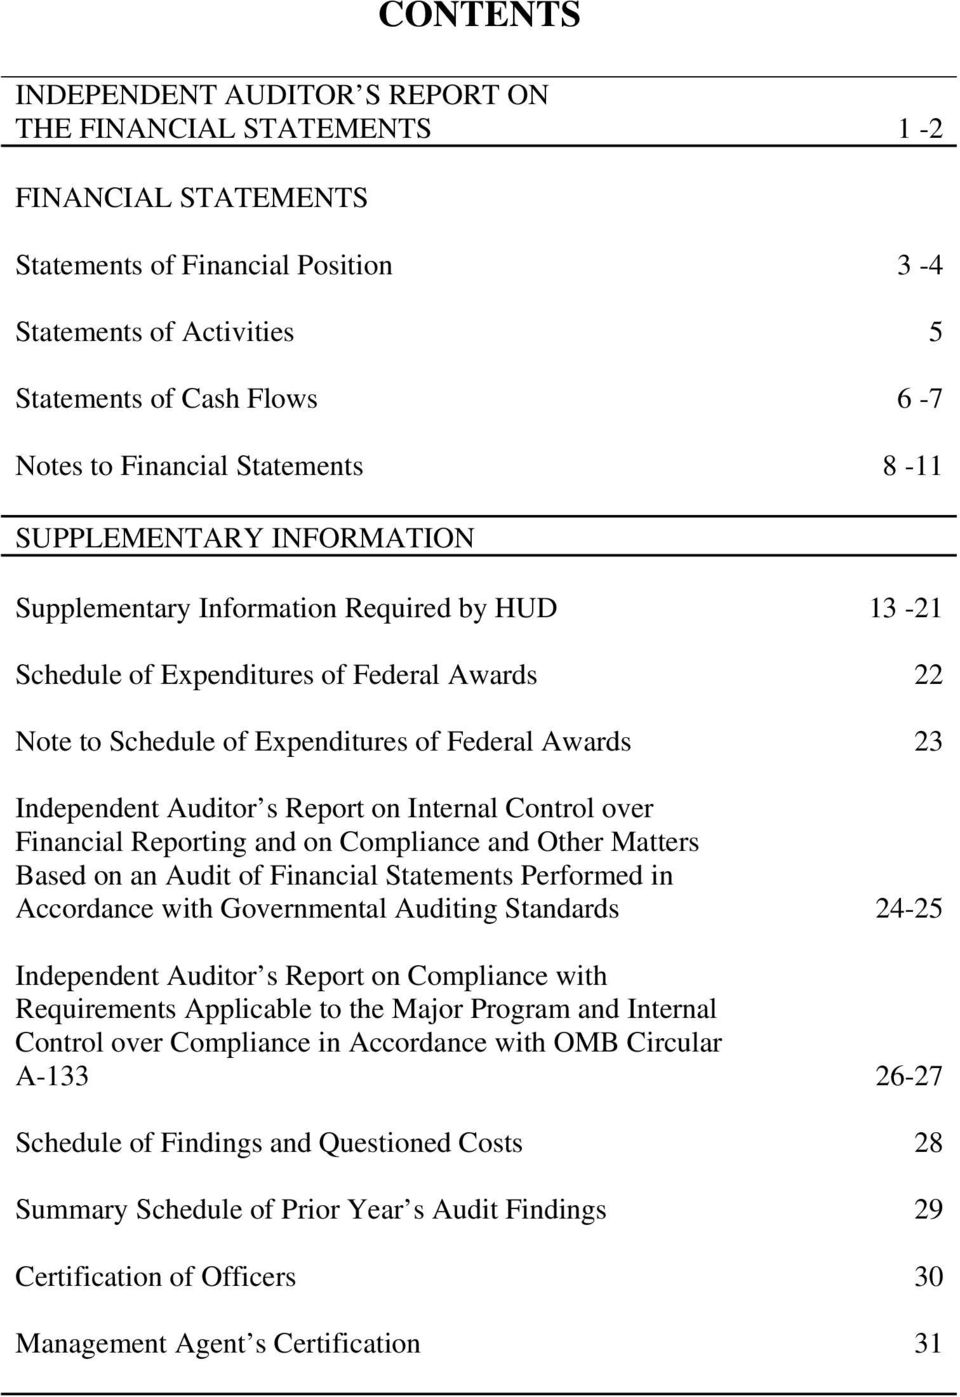 Independent Auditor s Report on Internal Control over Financial Reporting and on Compliance and Other Matters Based on an Audit of Financial Statements Performed in Accordance with Governmental